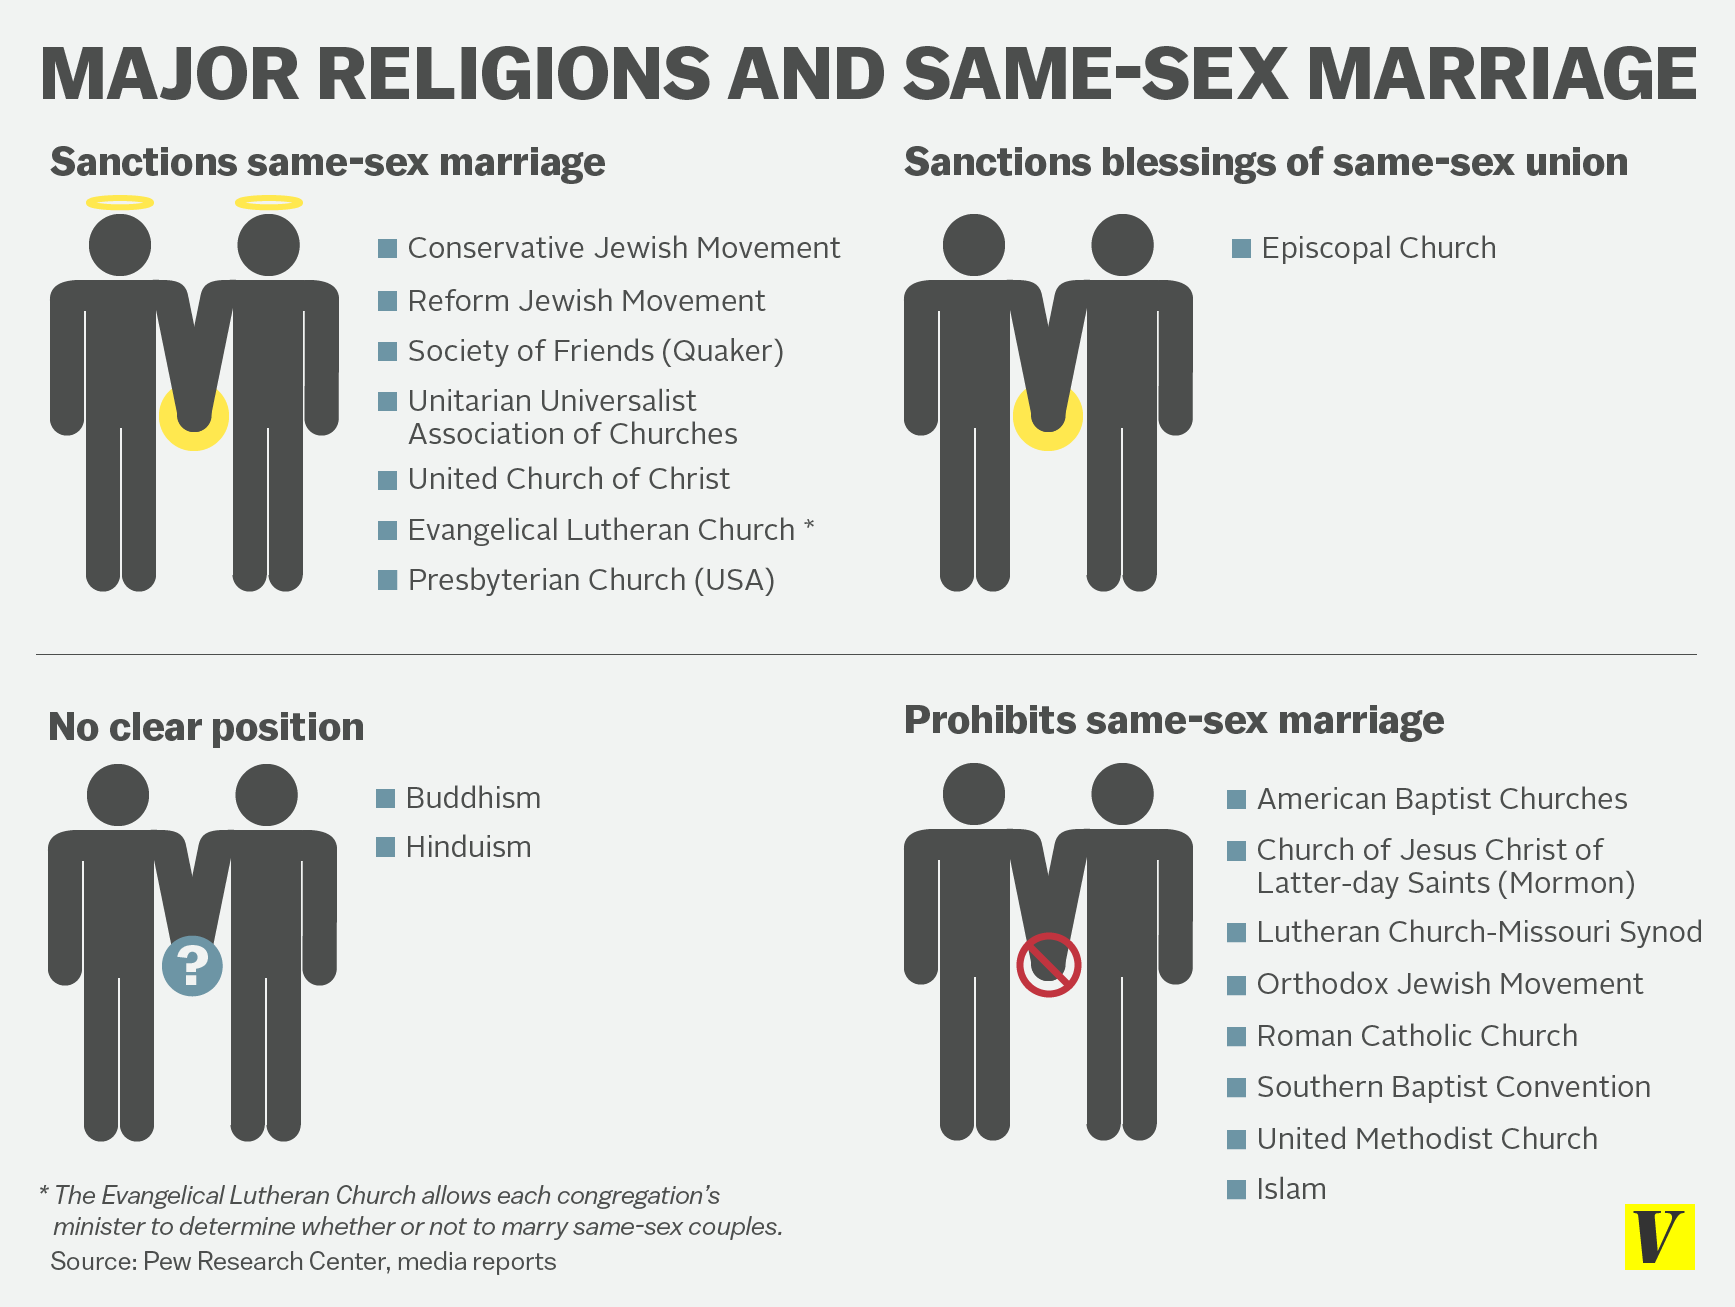 Christian view on same sex marriage